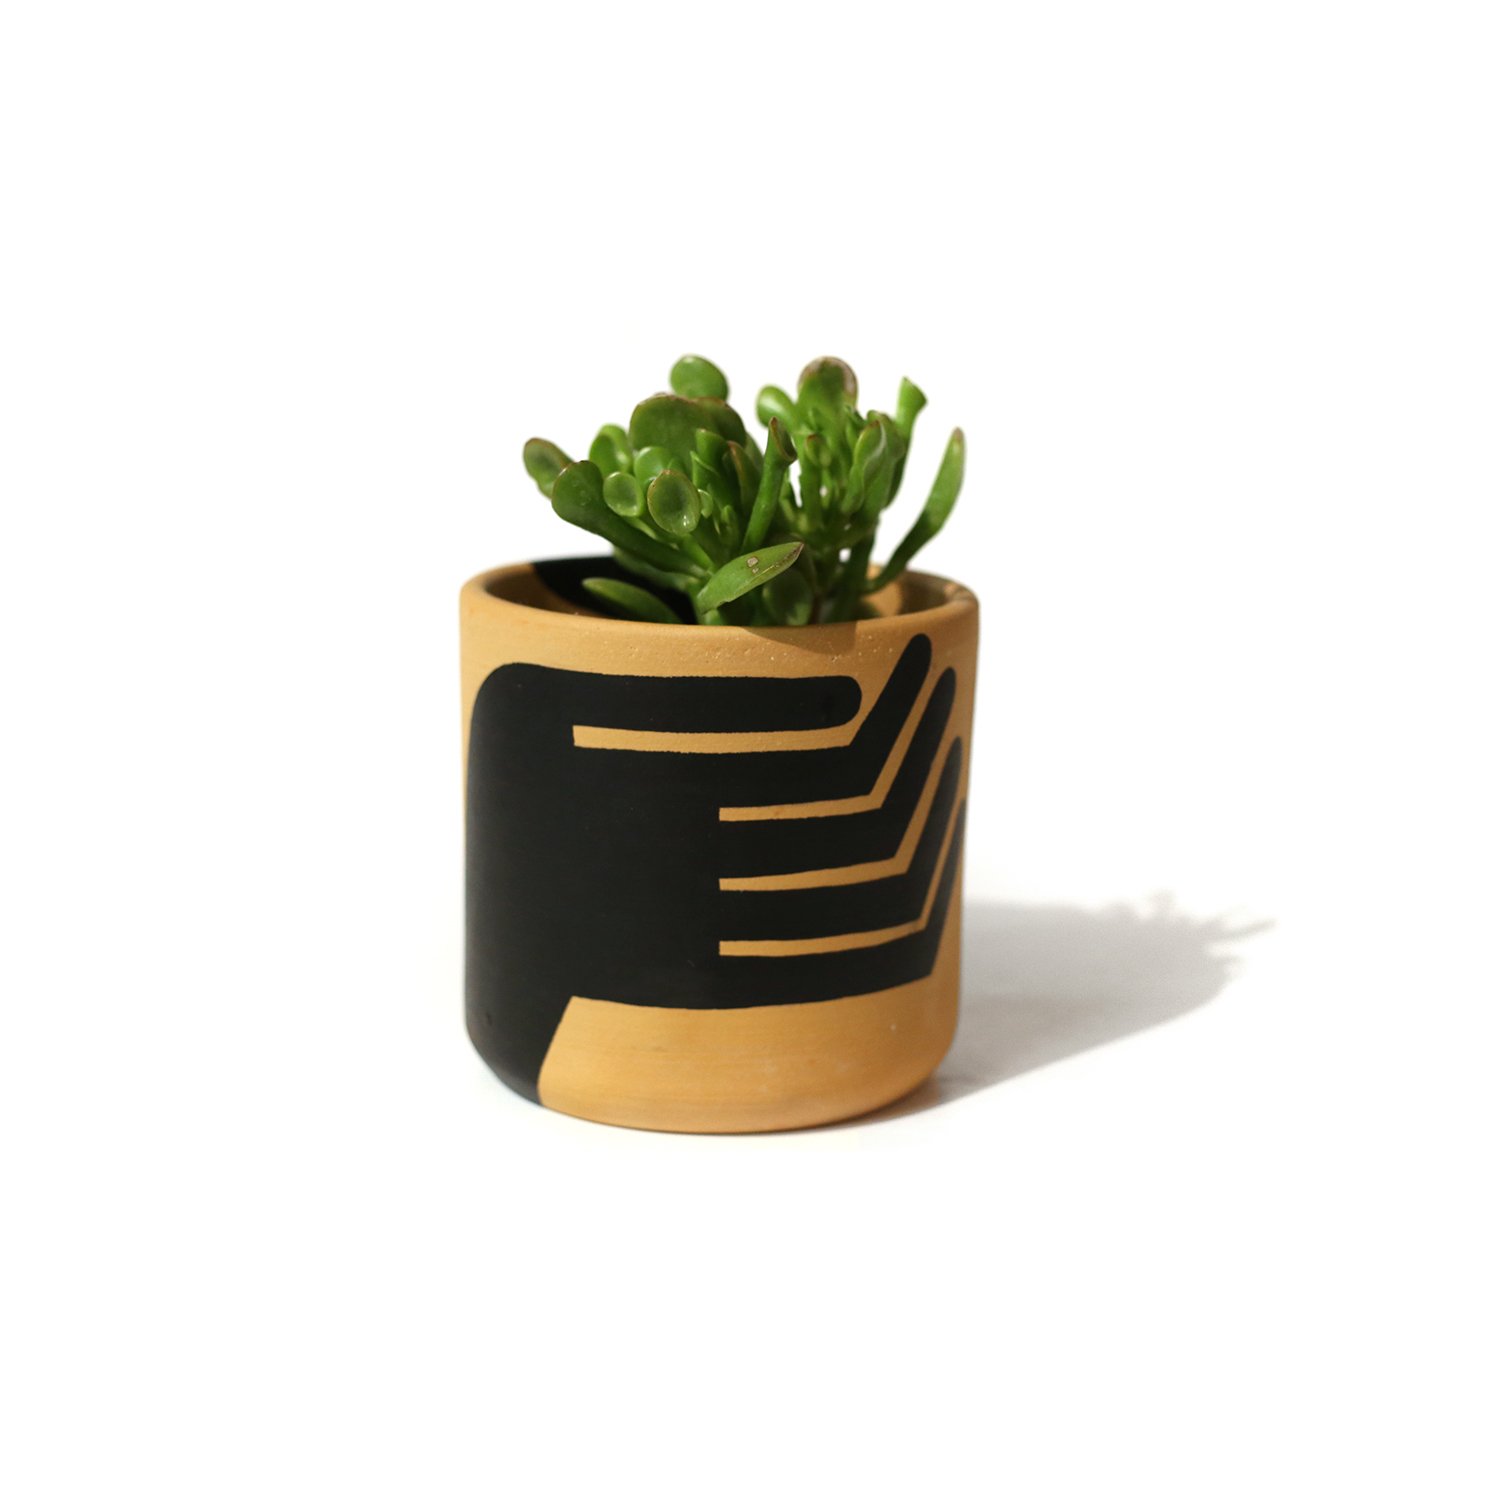 Planter by C. Marcus McCarty — practical art